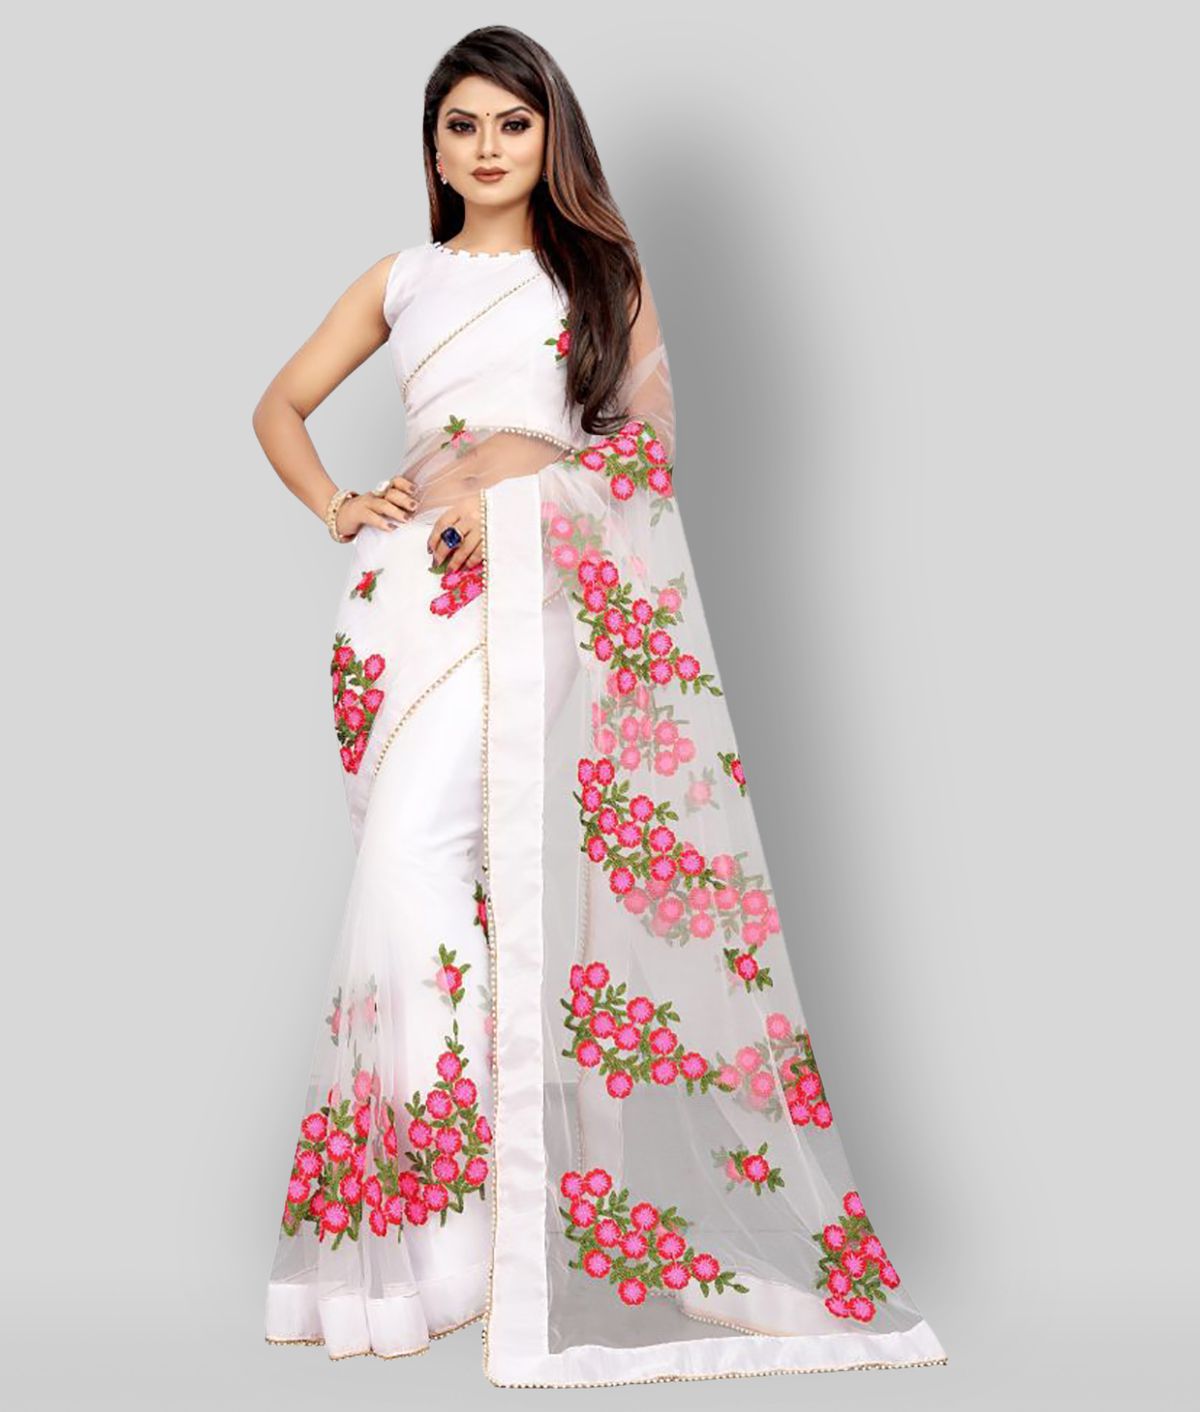     			Gazal Fashions - White Net Saree With Blouse Piece (Pack of 1)